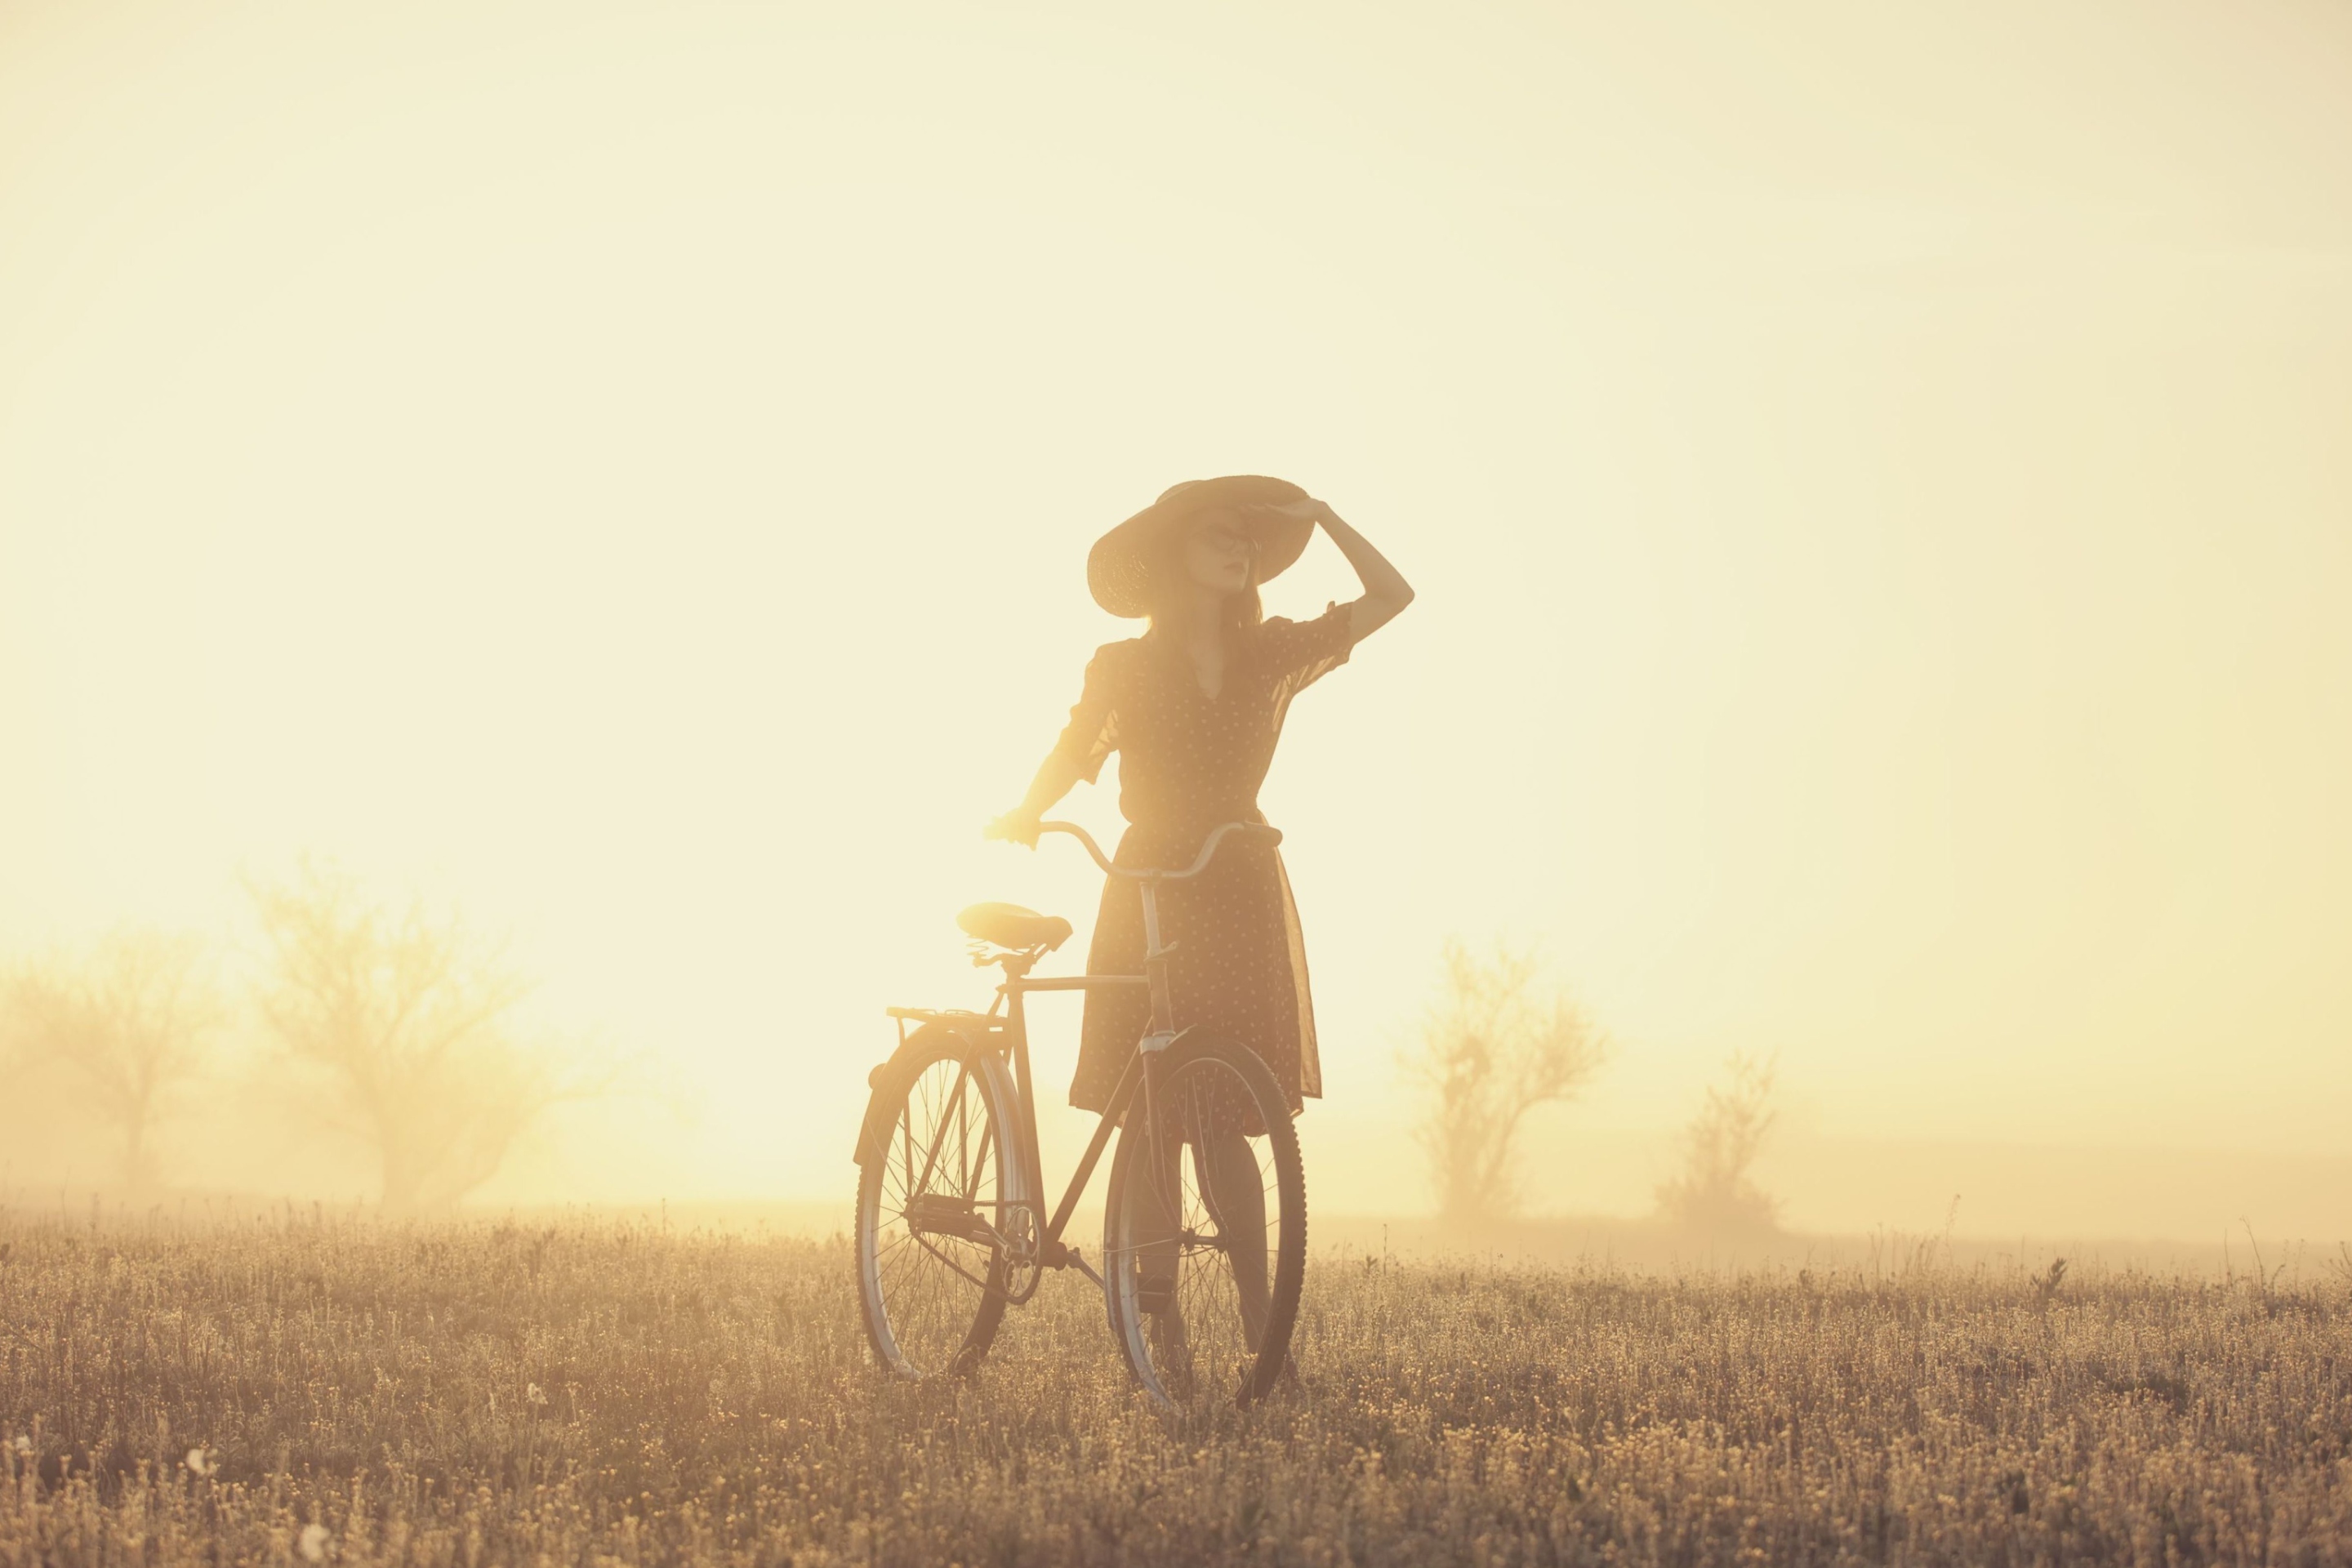 Girl And Bicycle On Misty Day screenshot #1 2880x1920